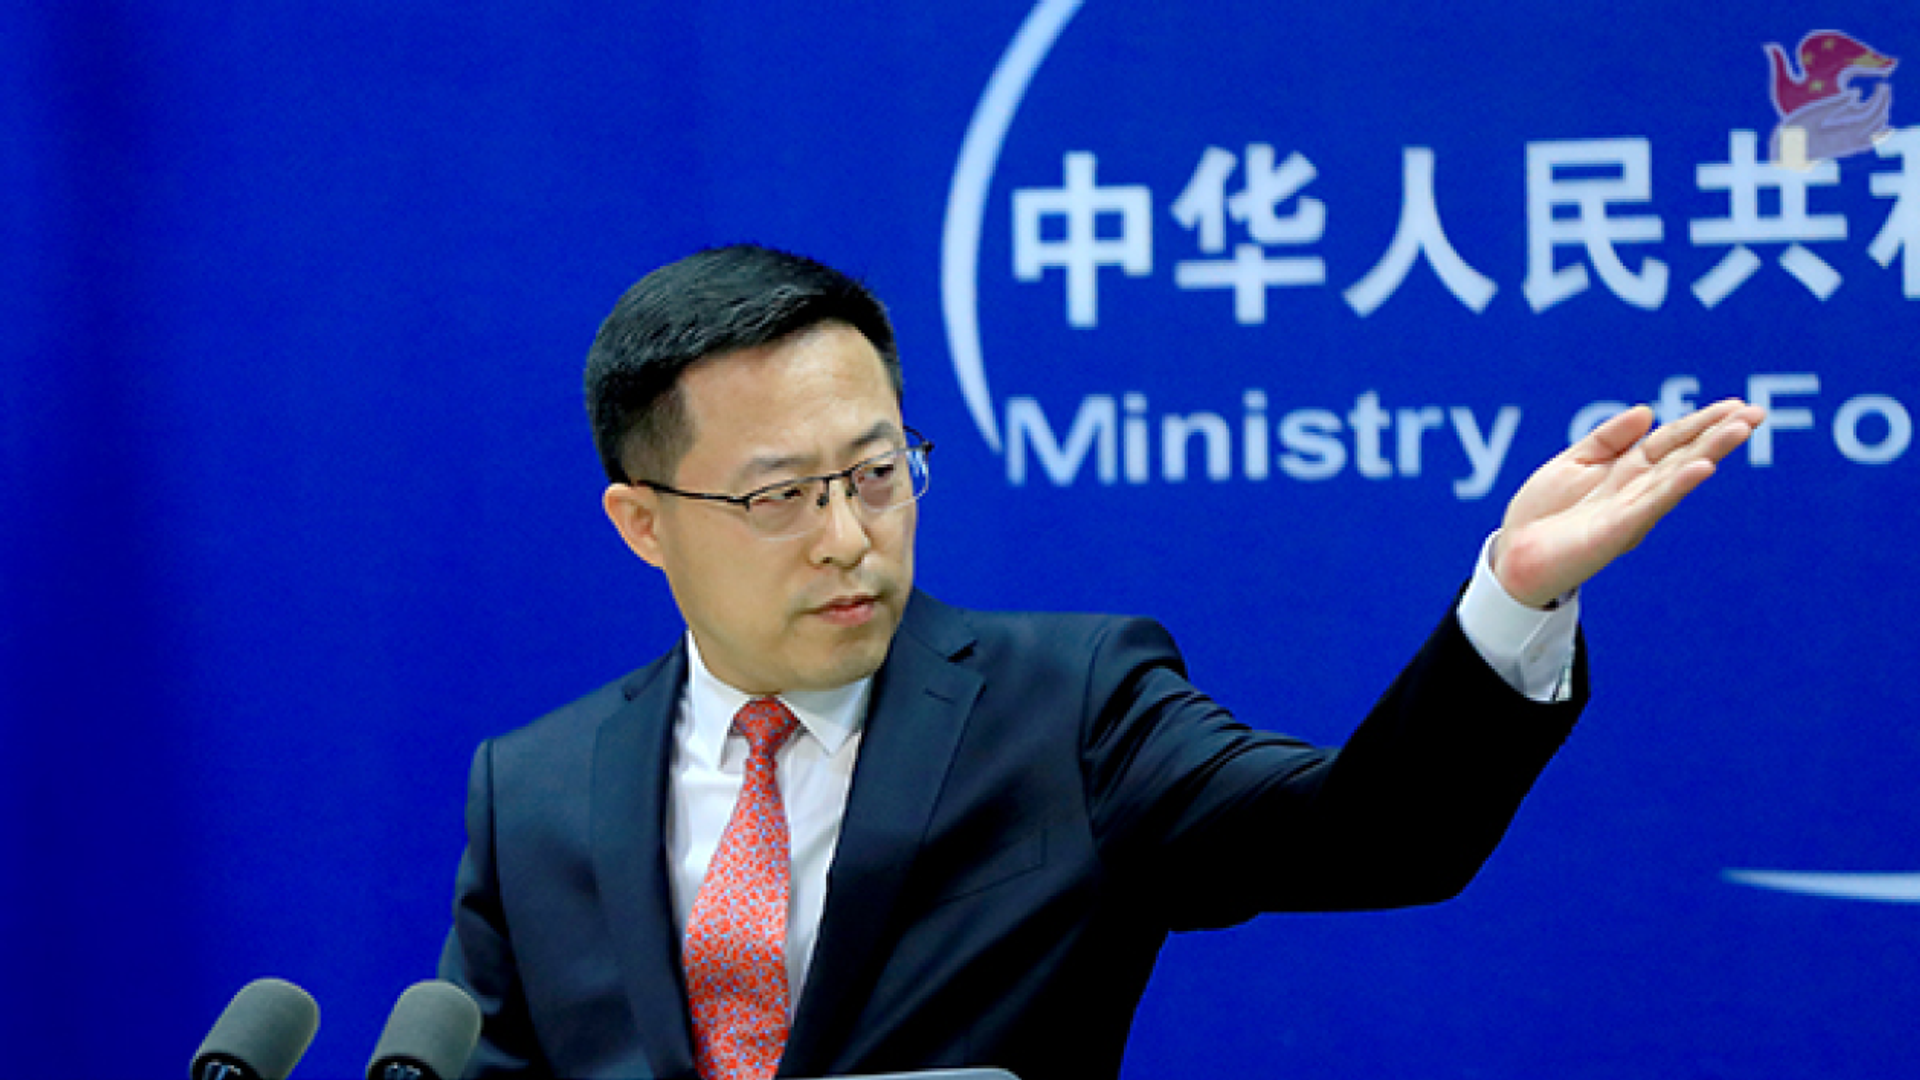 Chinese Foreign Ministry spokesperson Zhao Lijian answers press questions at an April 7, 2022, press conference. - Sputnik International, 1920, 26.05.2022